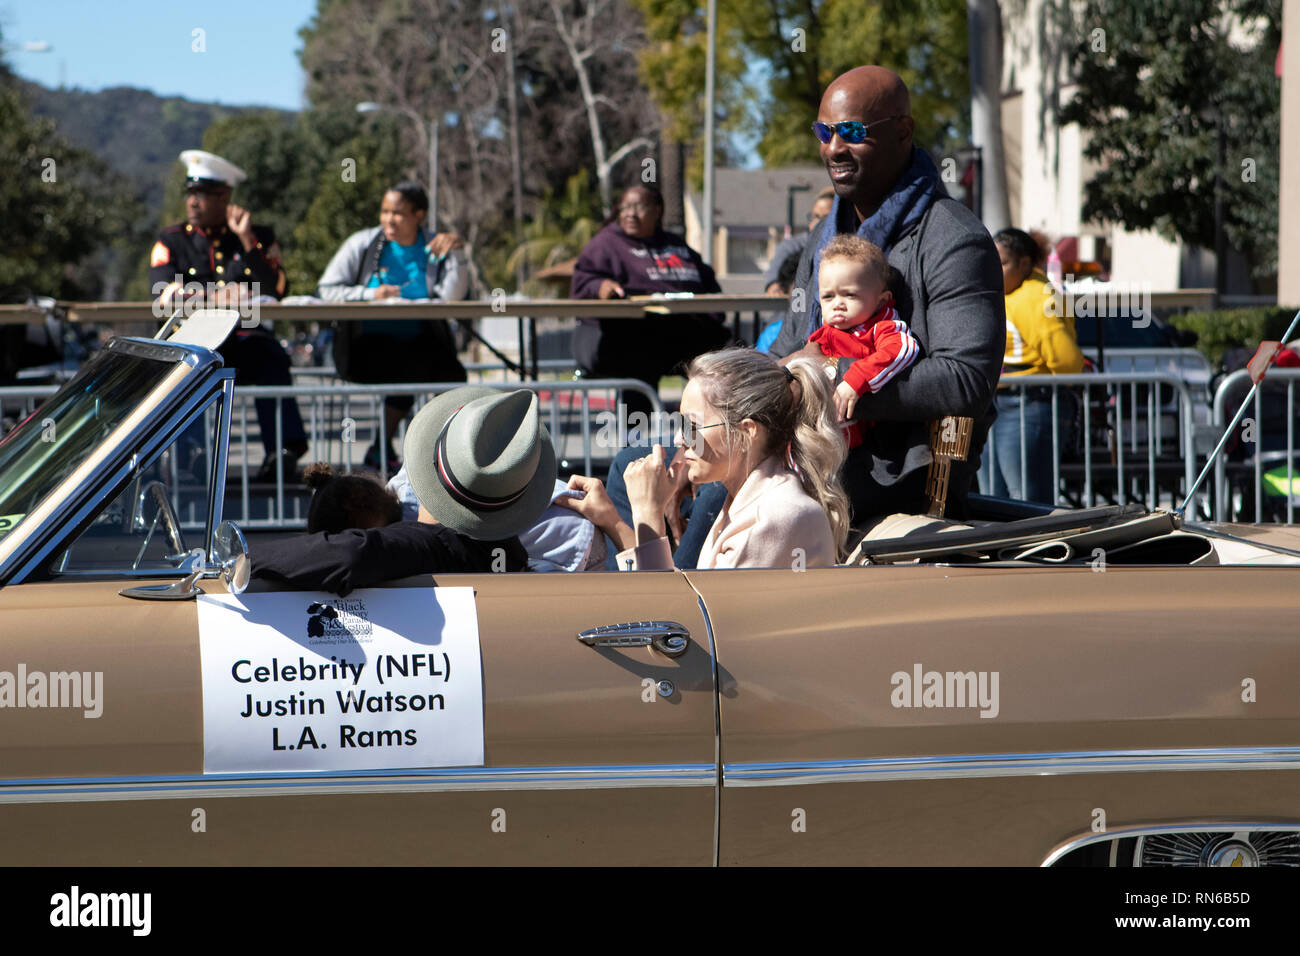 Pasadena, Los Angeles County, California, USA. 16th Feb 2019. - 37th Annual Black History Parade and Festival which celebrates Black Heritage and Culture. The community and surrounding cities joined the celebration by participating and watching the parade which had celebrities, politicians, activists, clubs and children of all ages from different school levels. Celebrity NFL Justin Watson Los Angeles Rams Credit: Jesse Watrous/Alamy Live News Stock Photo